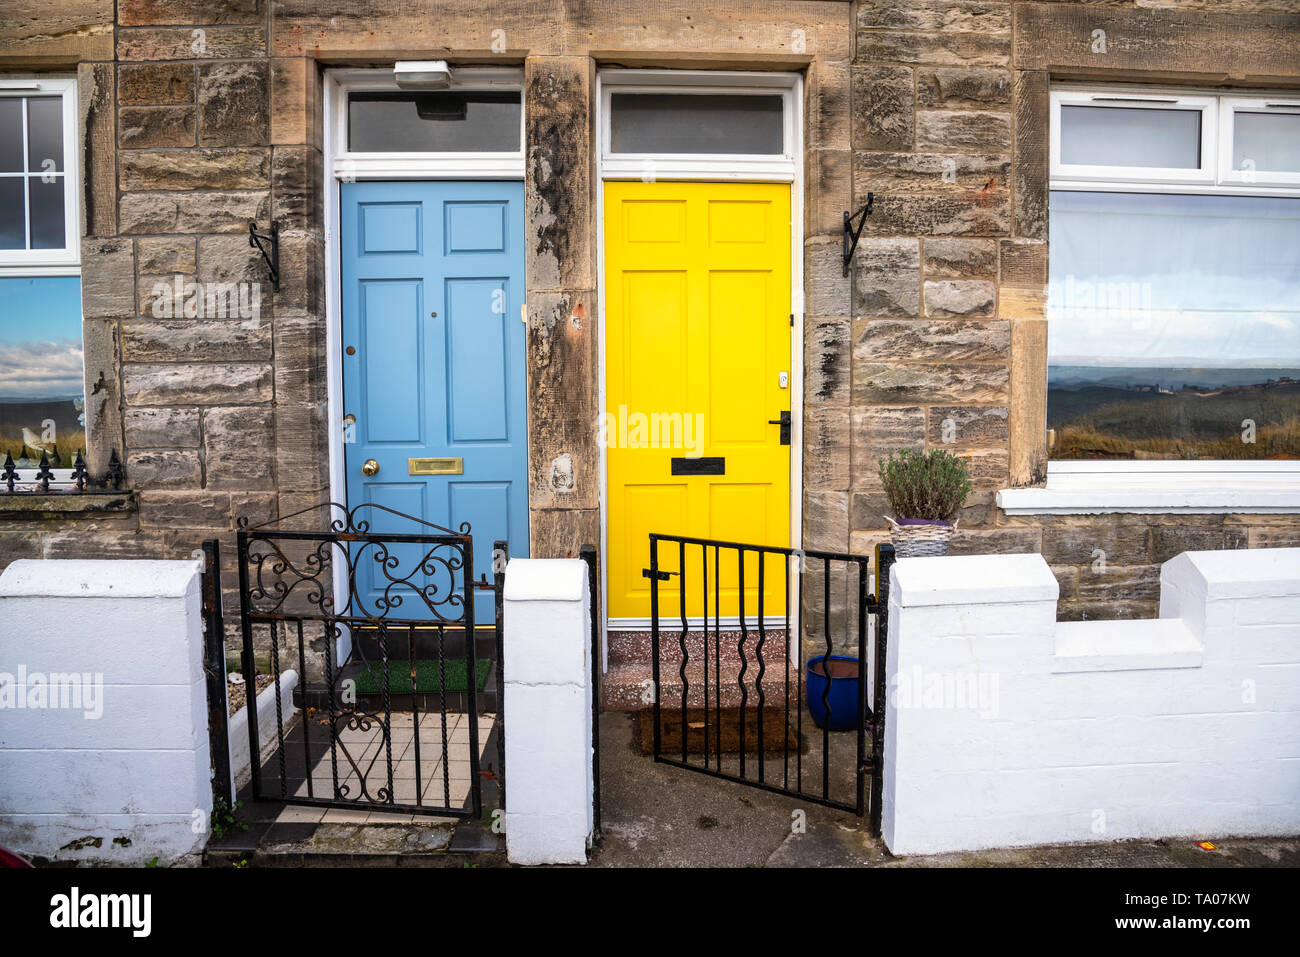 Colourful Wooden Front Doors of two traditional British Terraced Houses. One Door is Light Blue while the other is Bright Yellow. Stock Photo